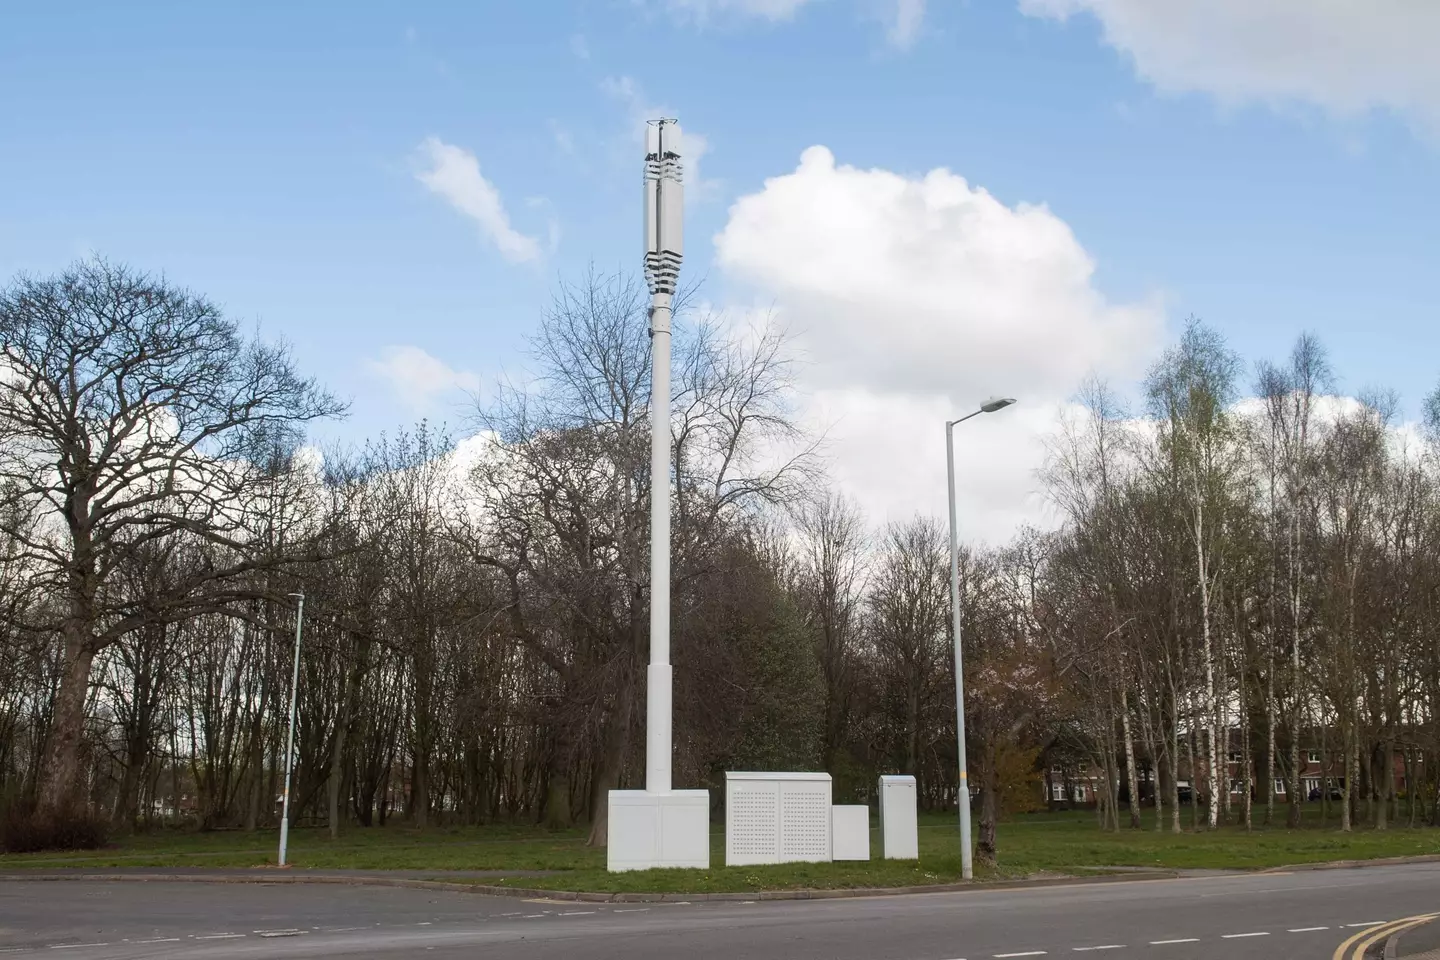 Residents refer to the mast as 'the sex toy at the end of the street'. (